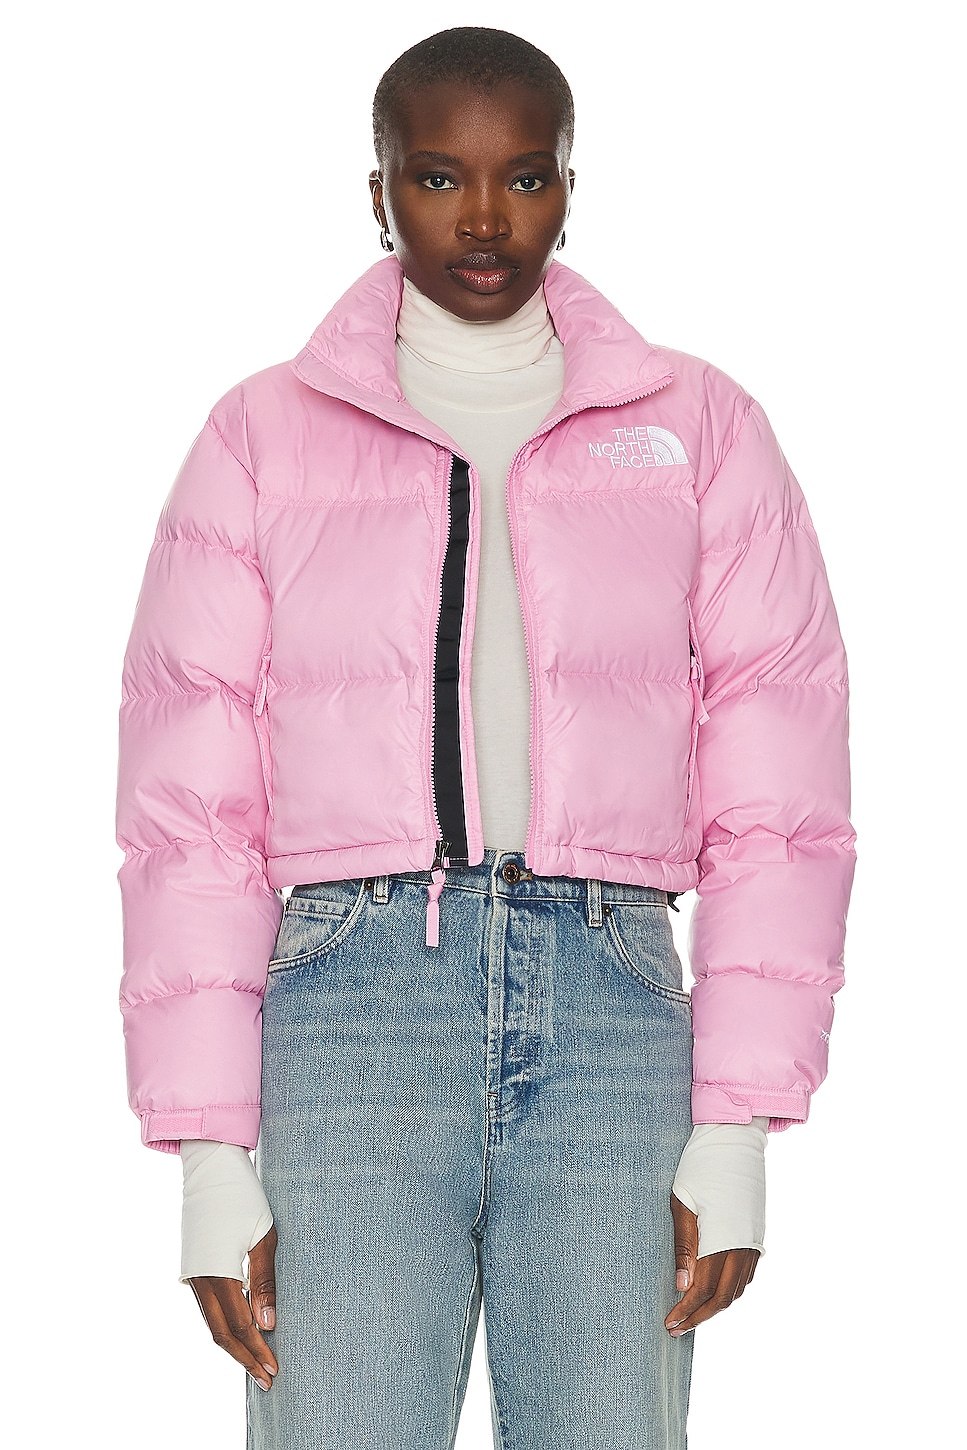 The North Face Nuptse Short Jacket in Orchid Pink | FWRD